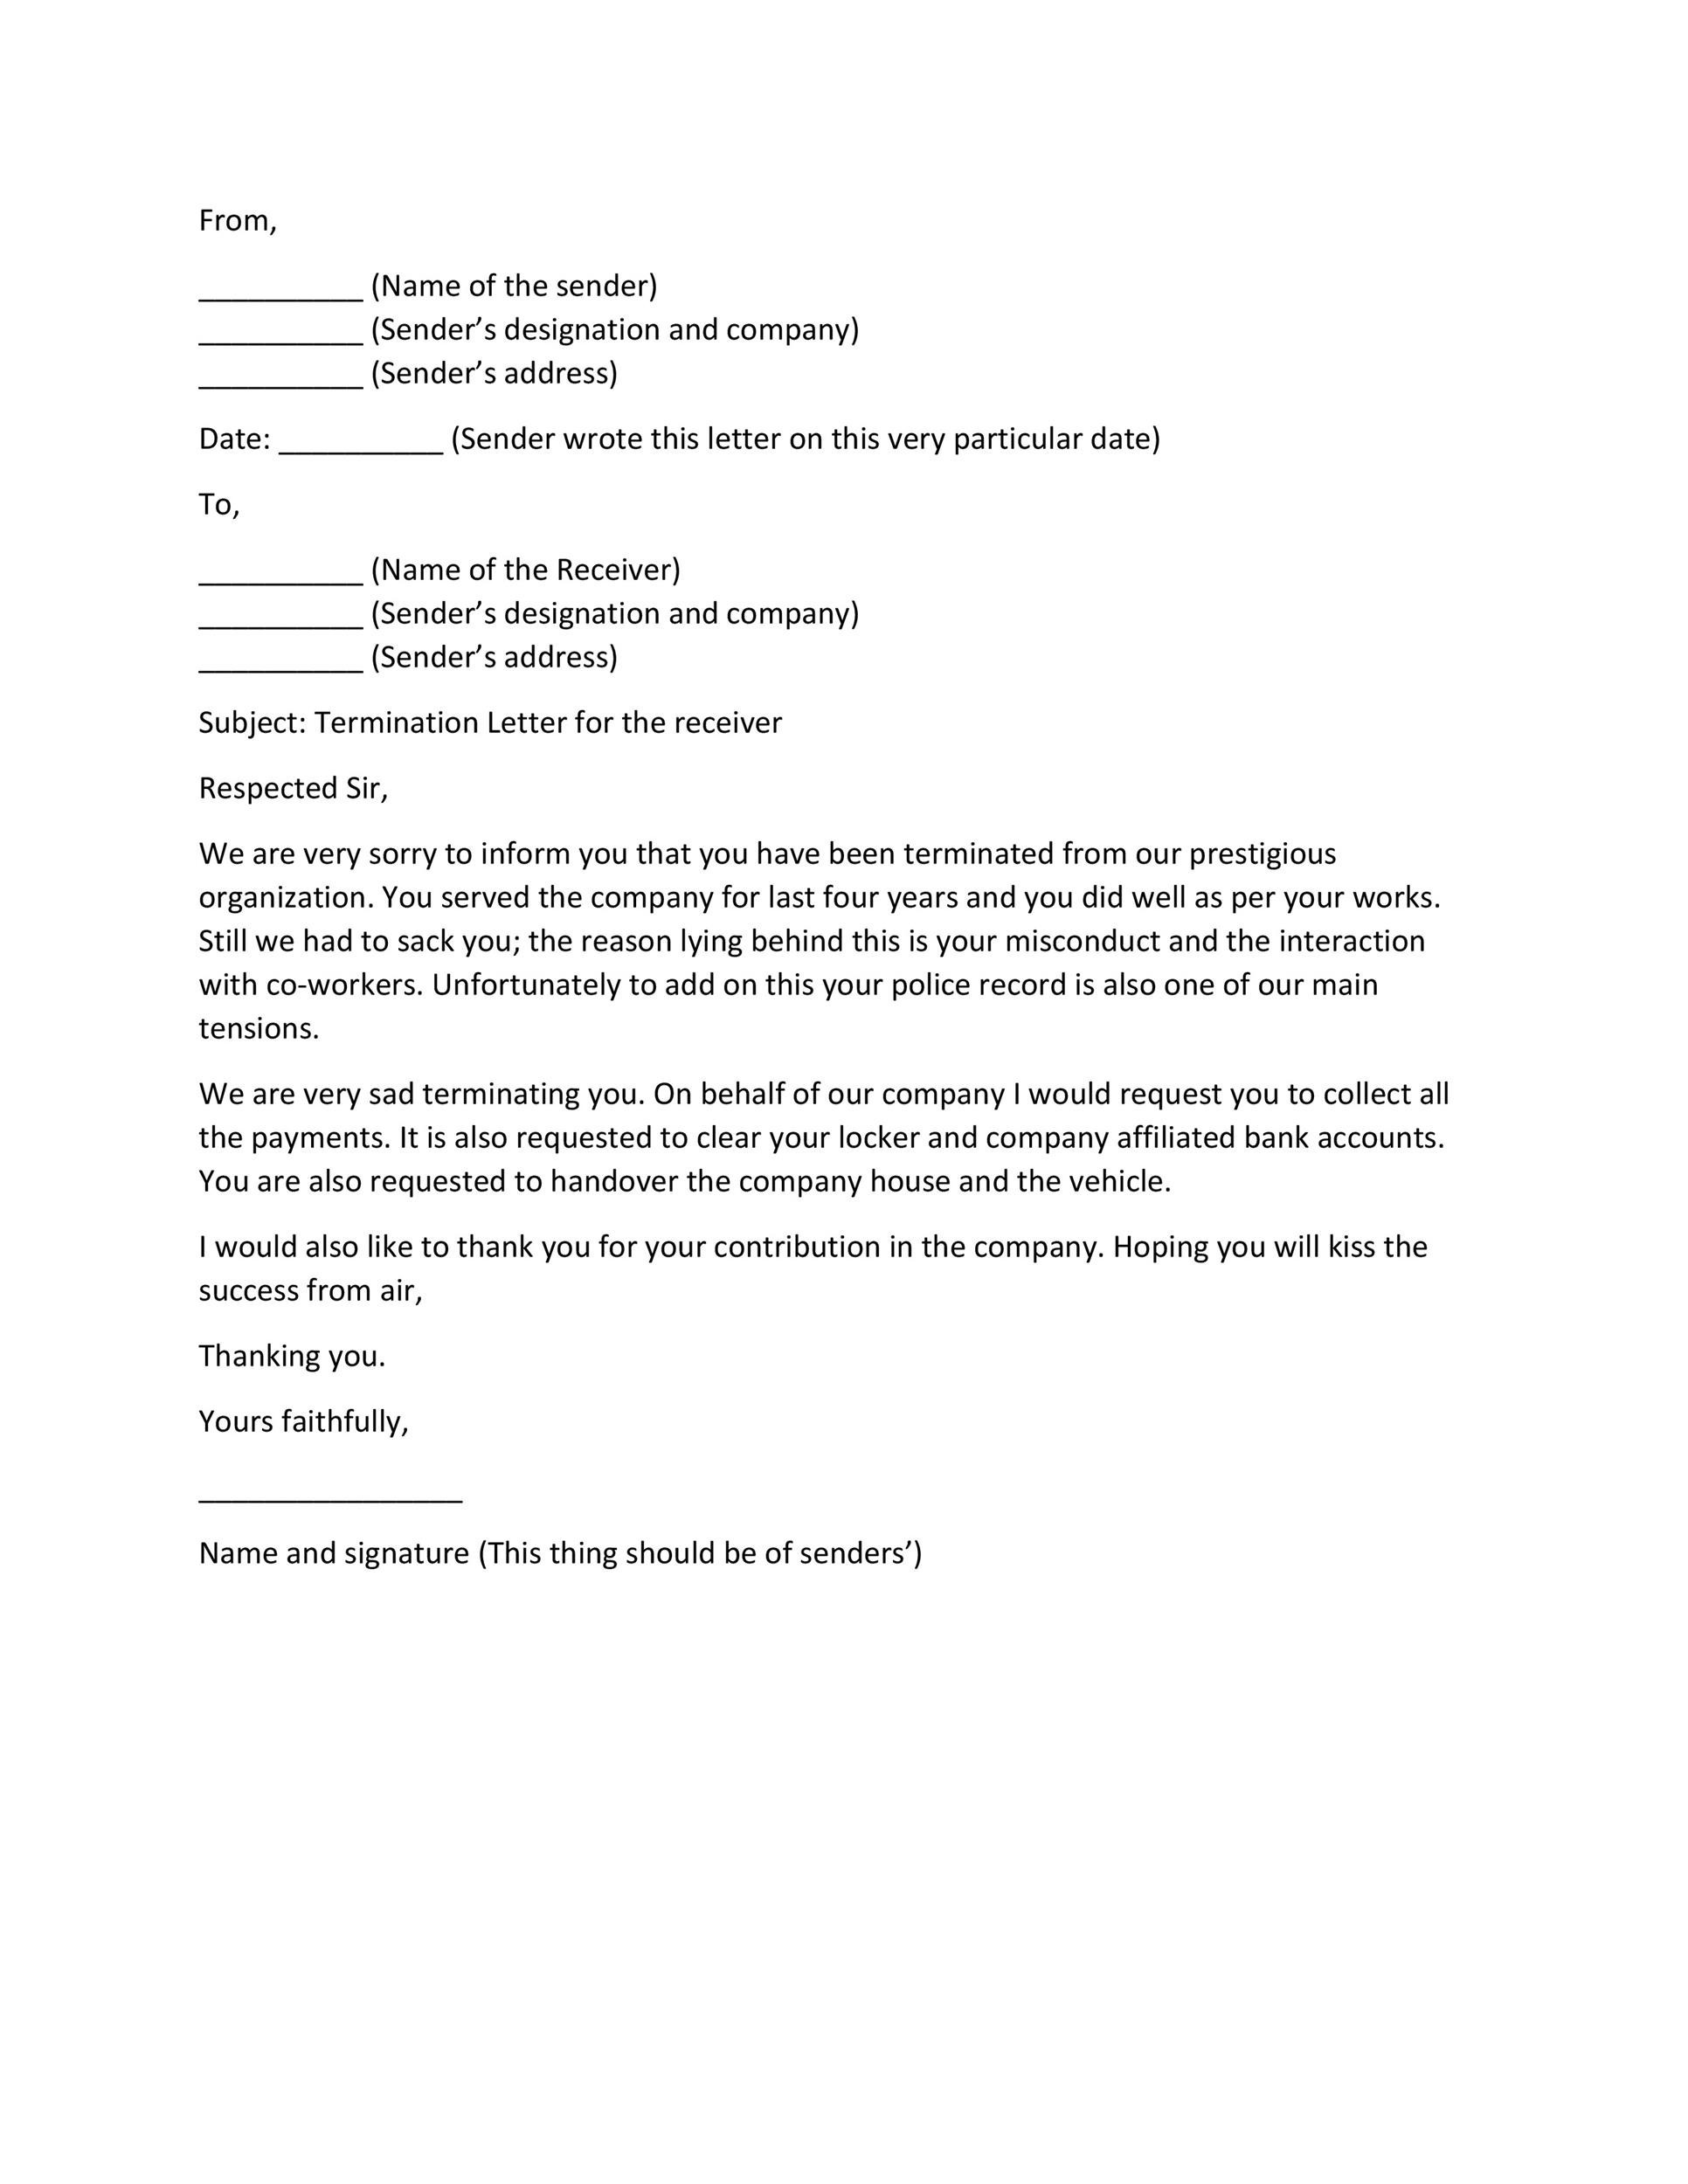 Termination Letter For Violation Of Company Policy from templatelab.com